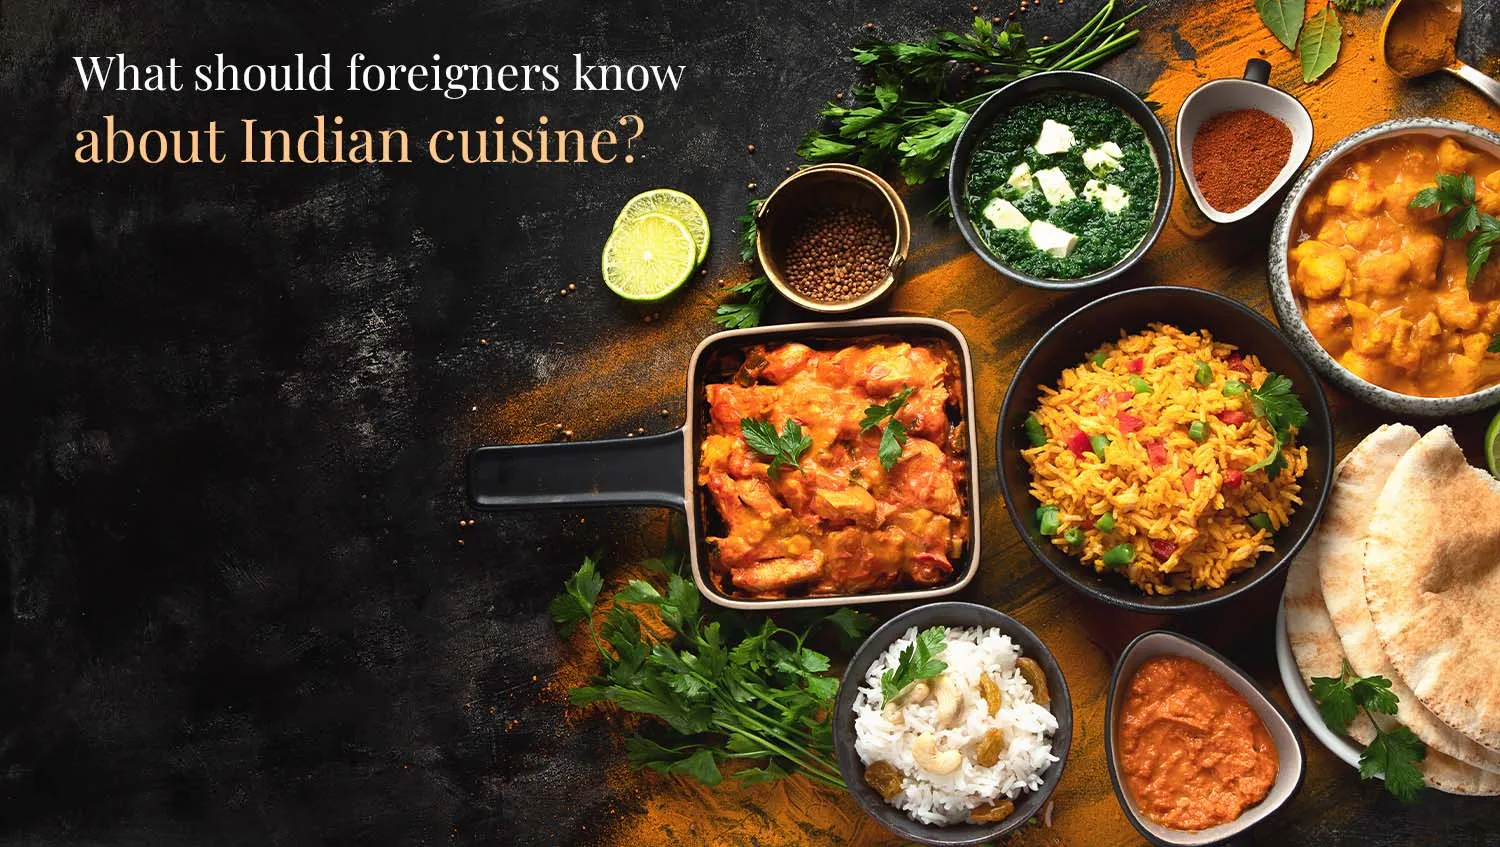 What should foreigners know about Indian cuisine